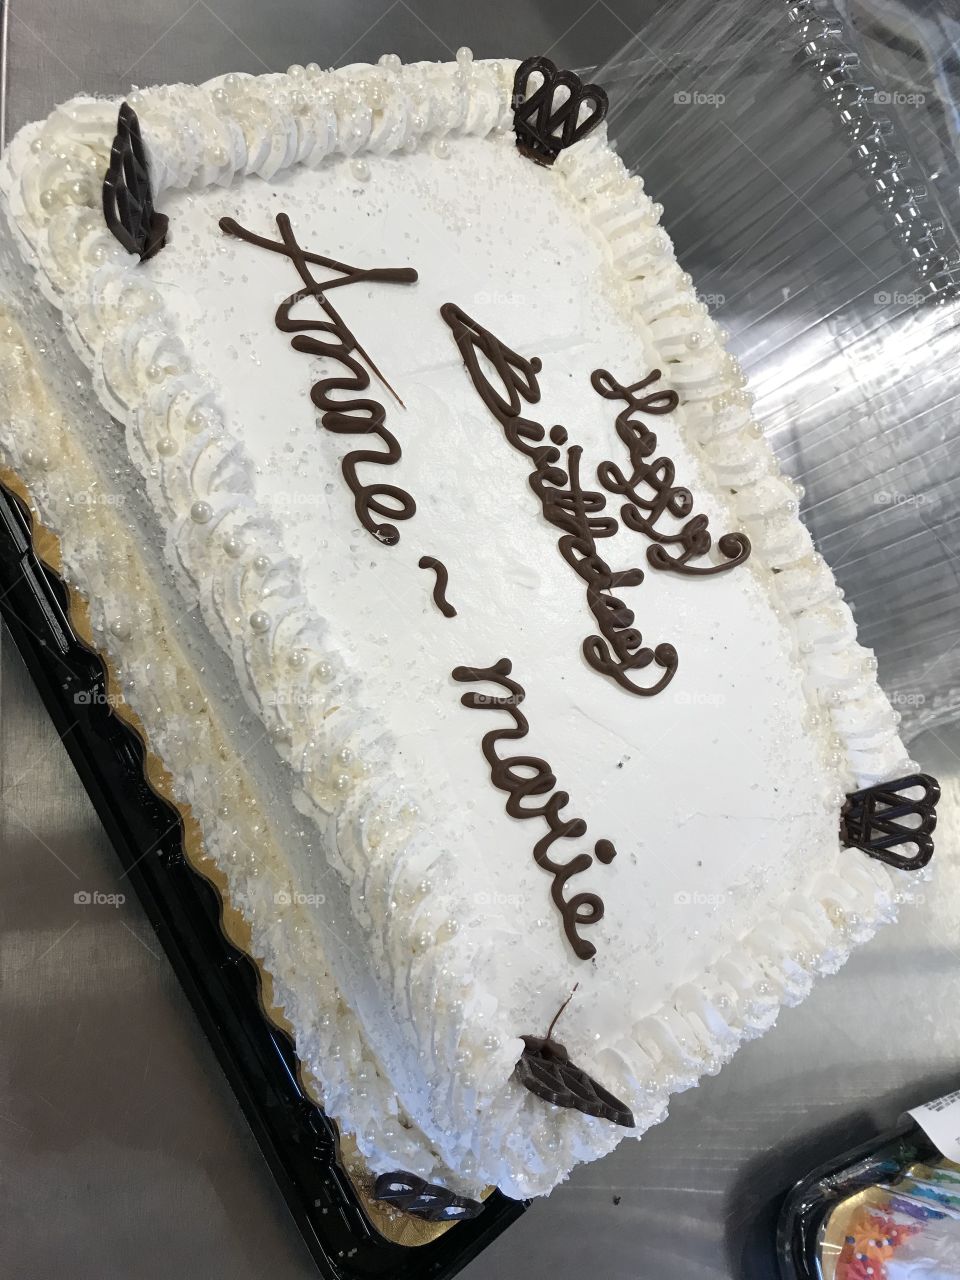 Simple birthday cake I made at work for nothing extra except for the fun of making it